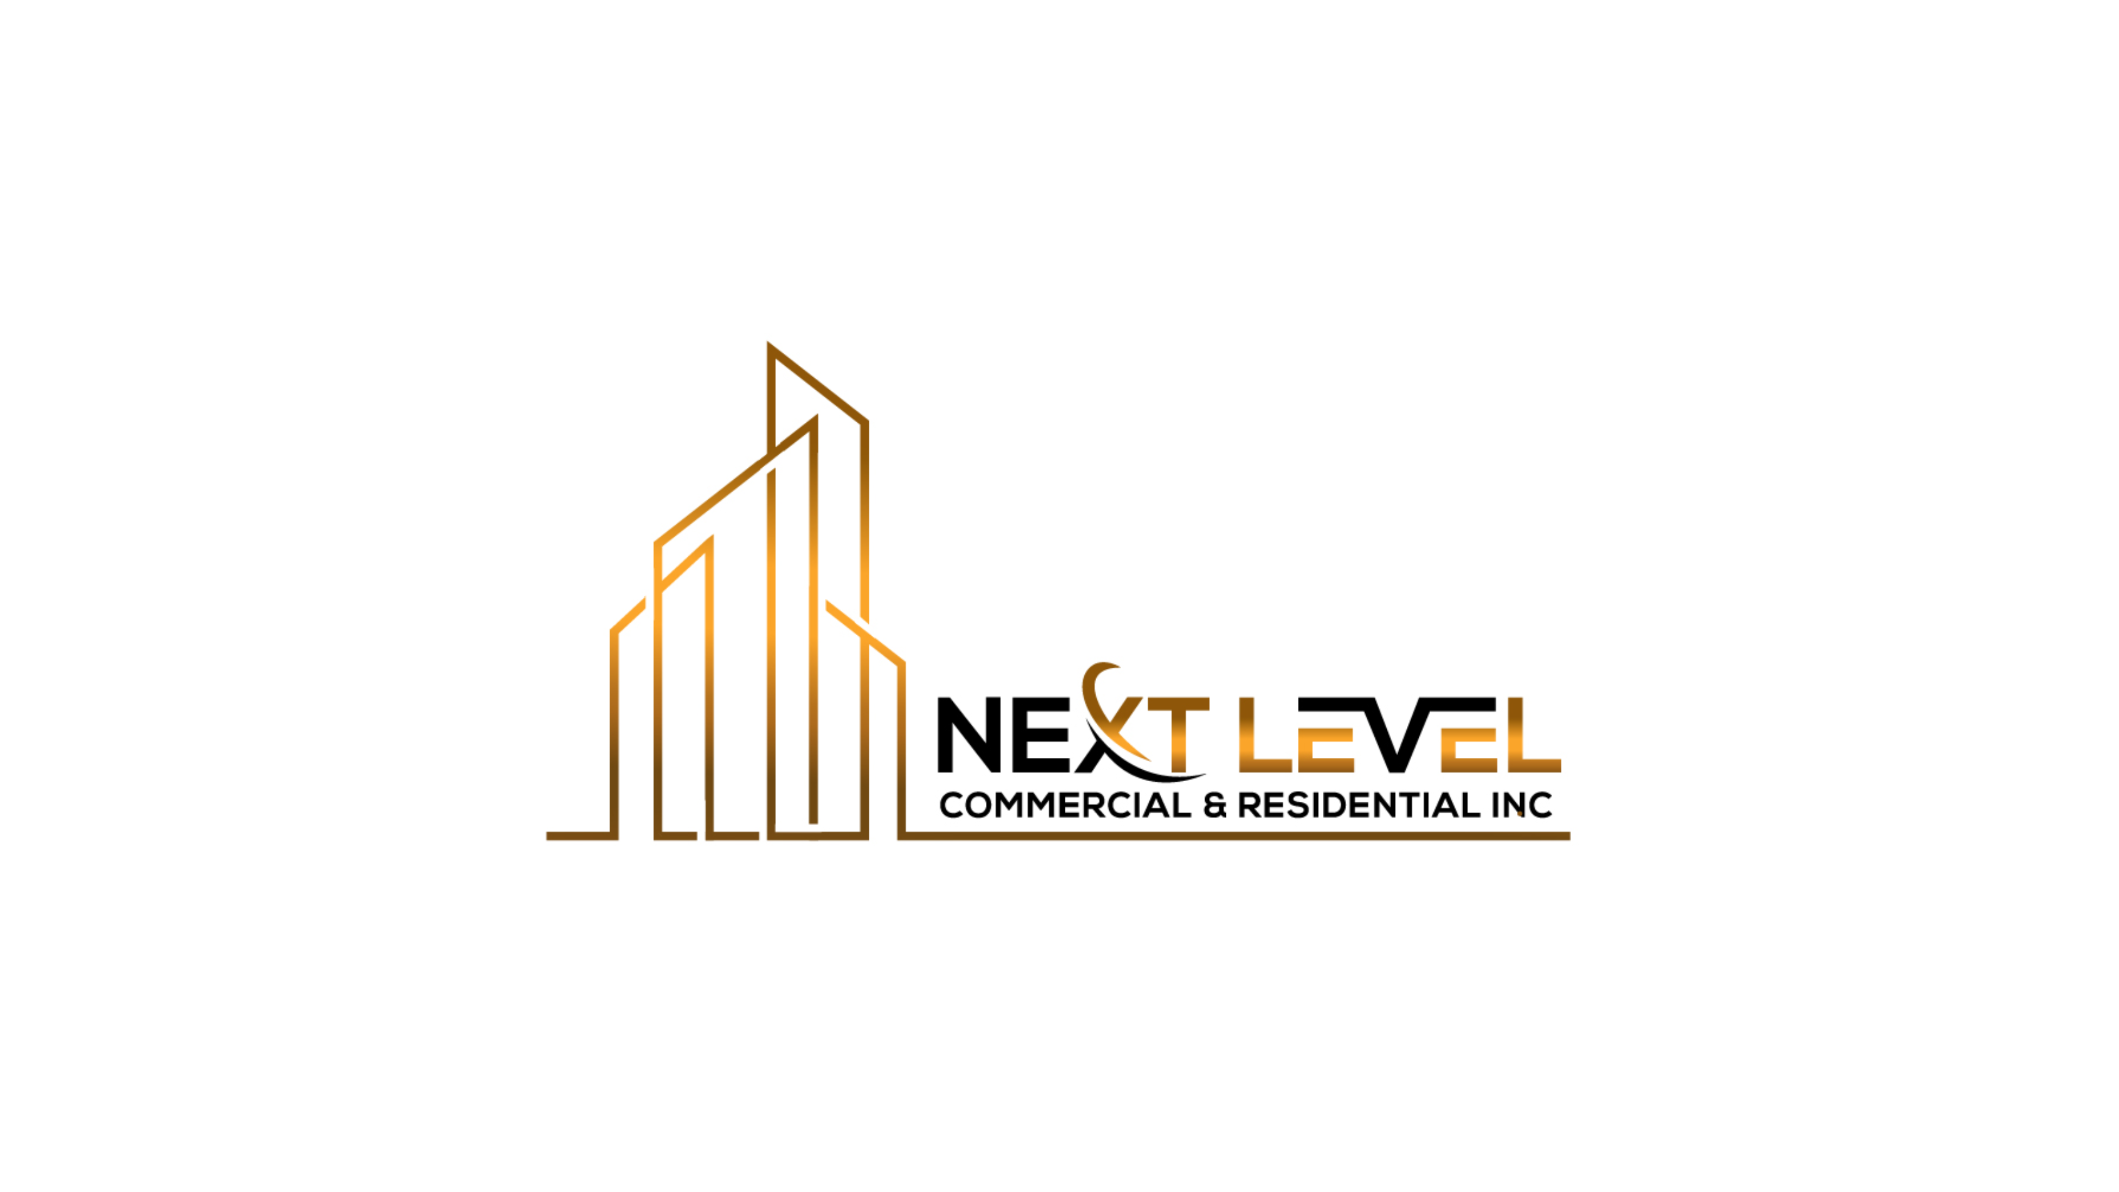 Next Level Commercial & Residential Inc.